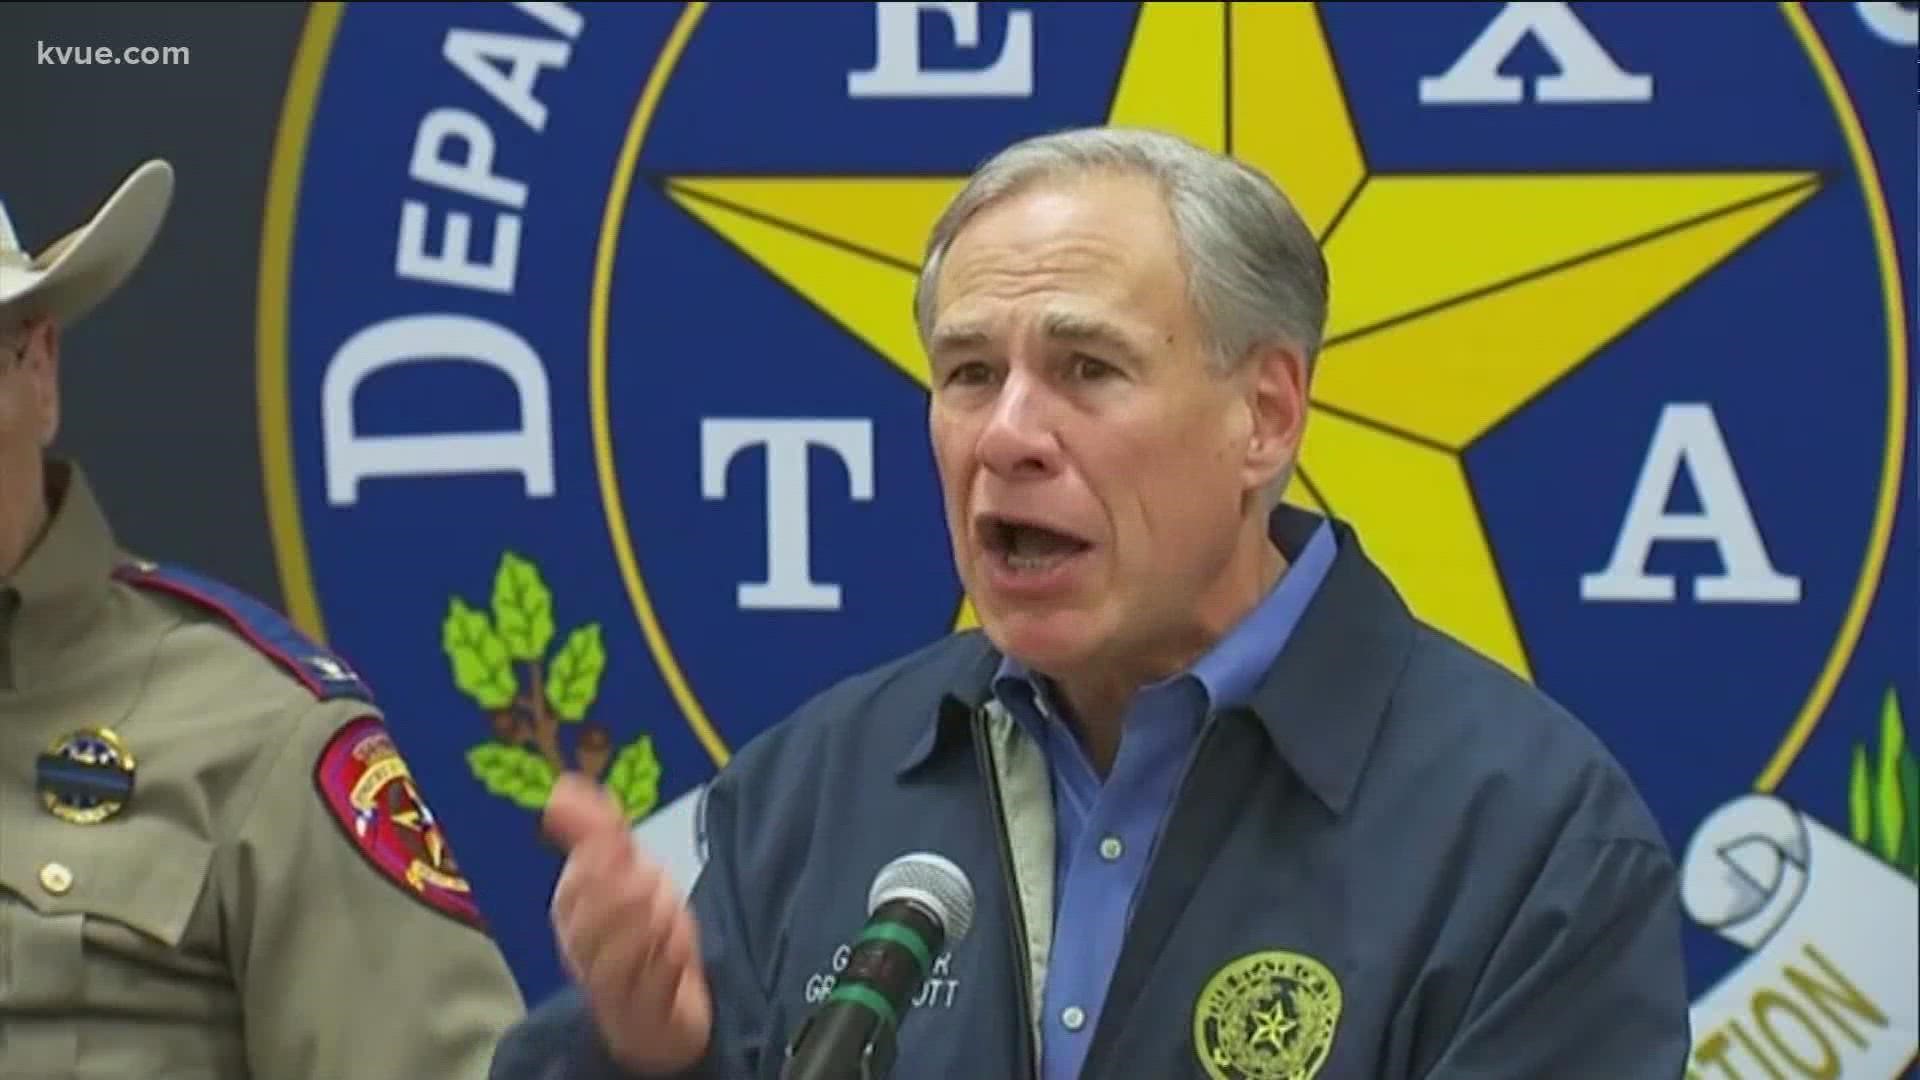 "TikTok should be ashamed, condemned and have a legal action brought against it...," said the Texas governor.